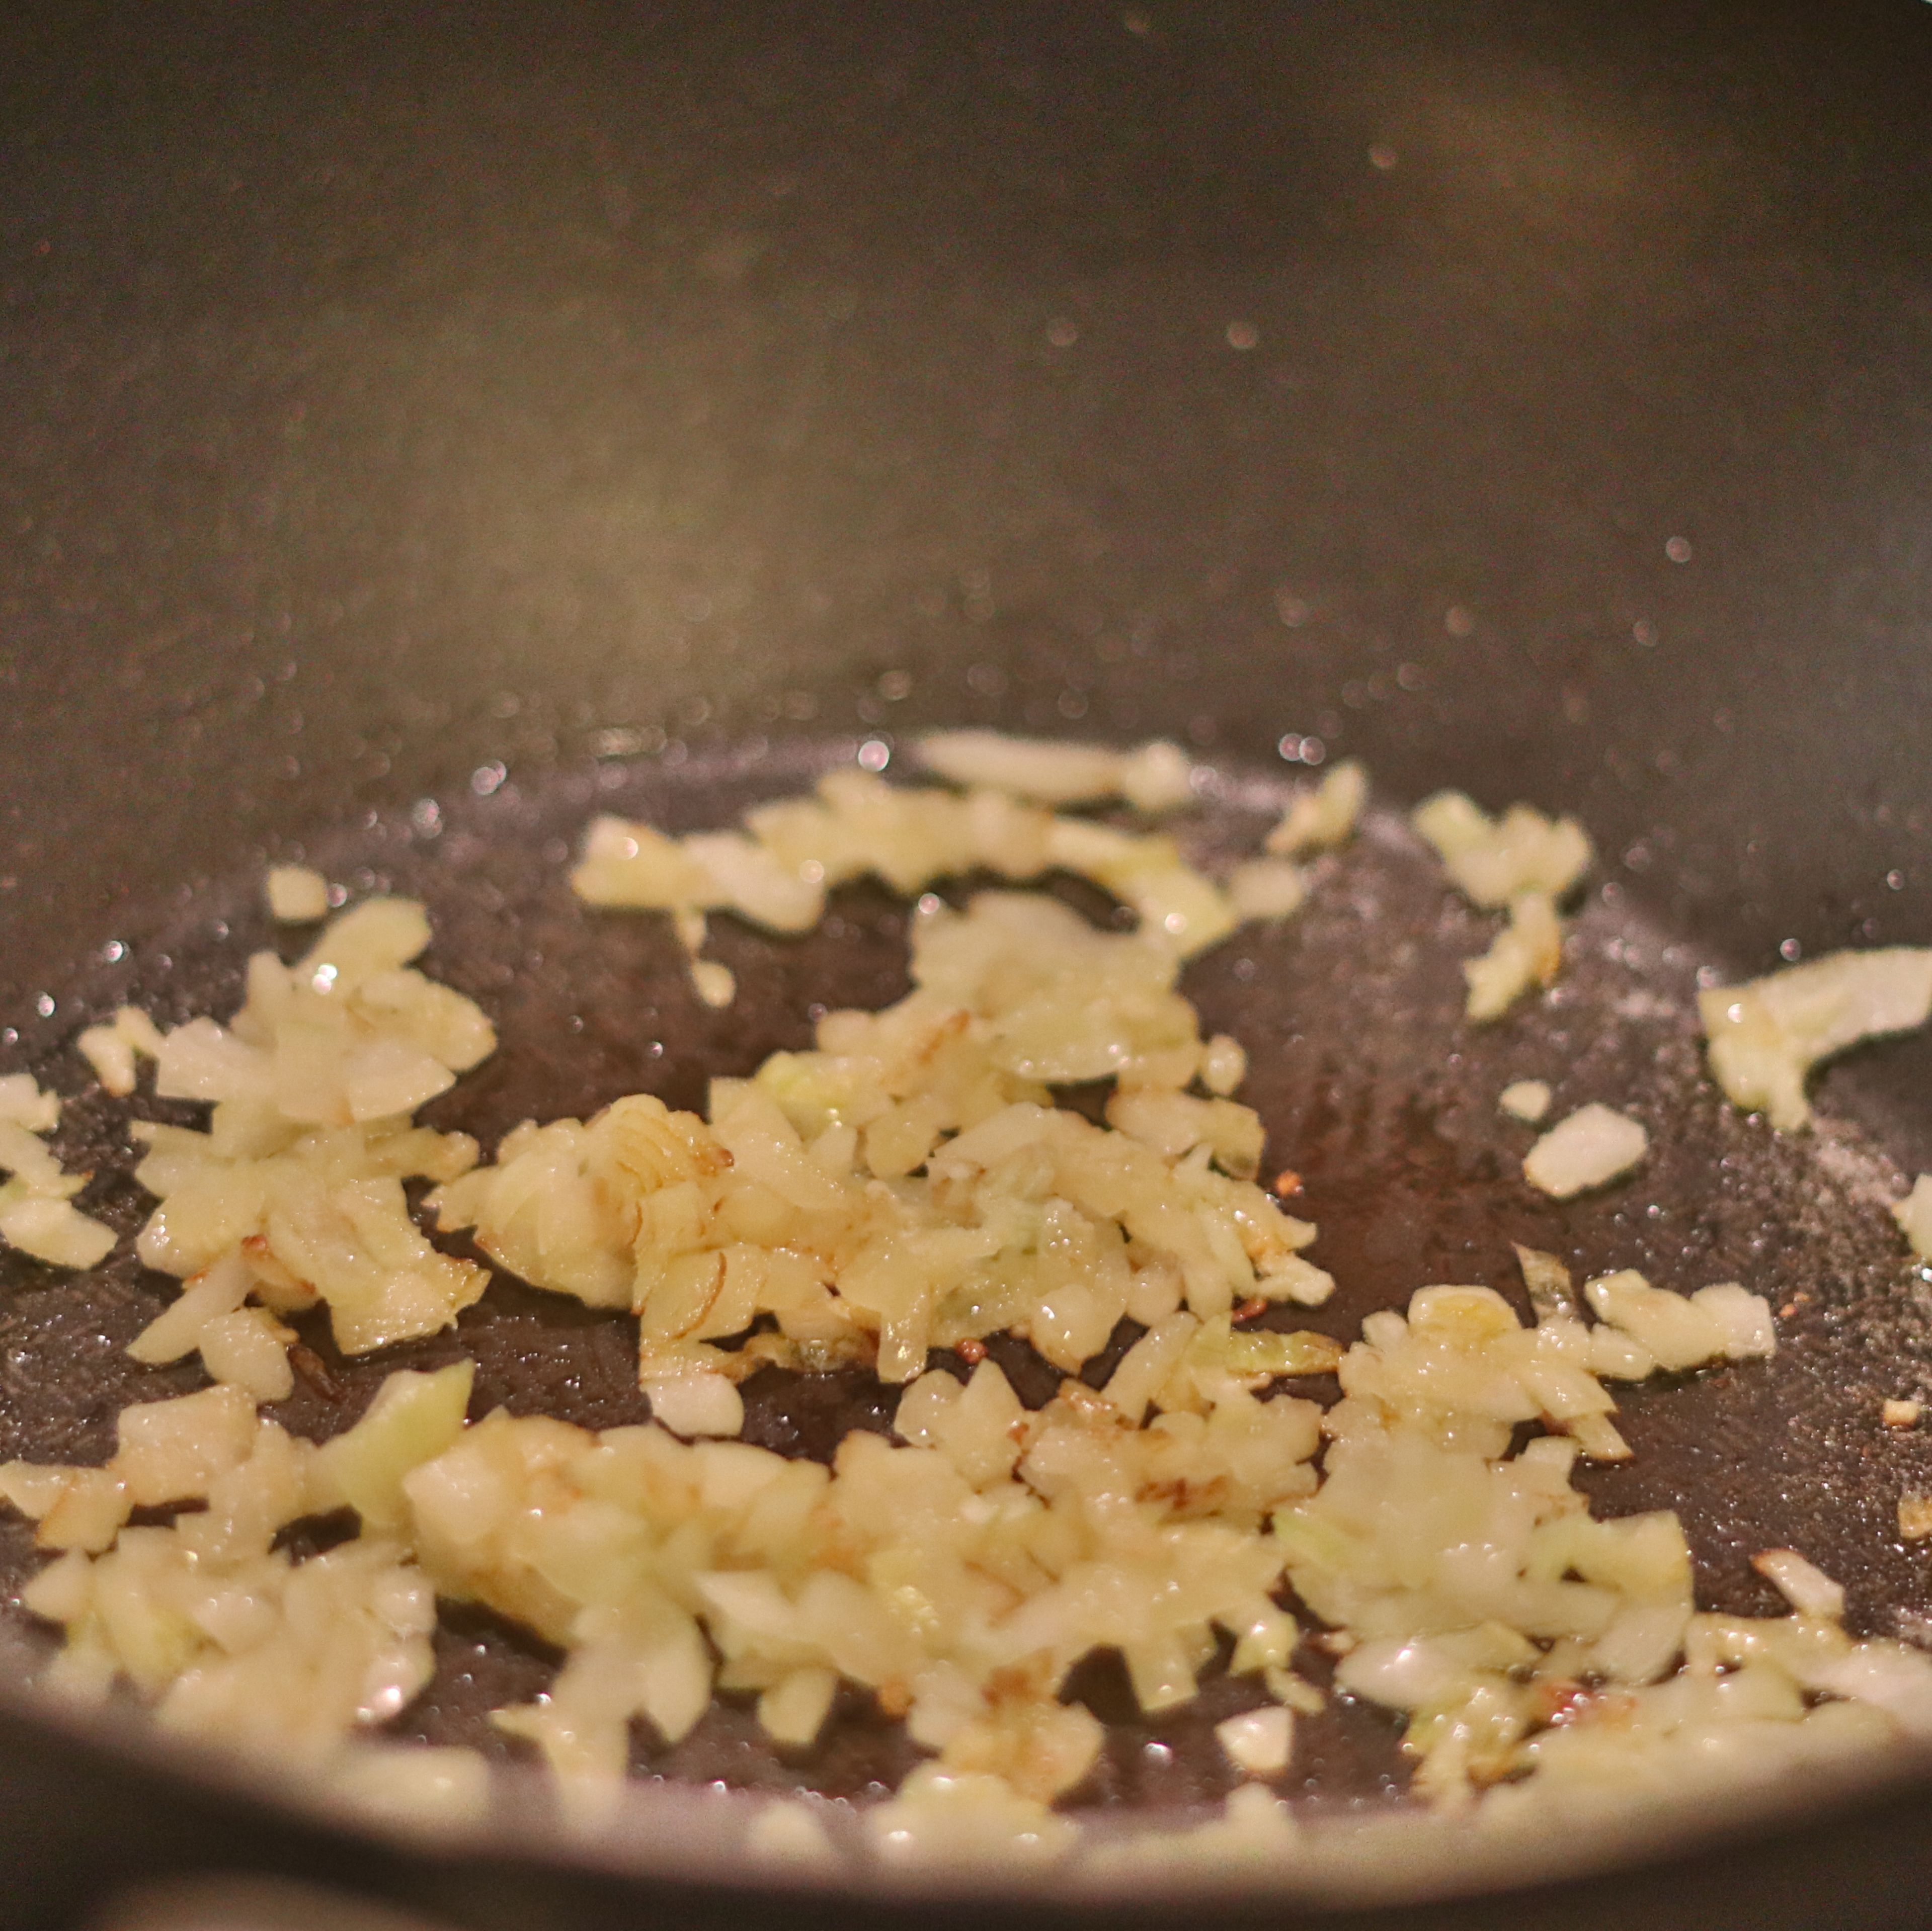 Add onion and garlic to a frying pan with some olive oil and let cook on medium heat until soft, approx 5 minutes.